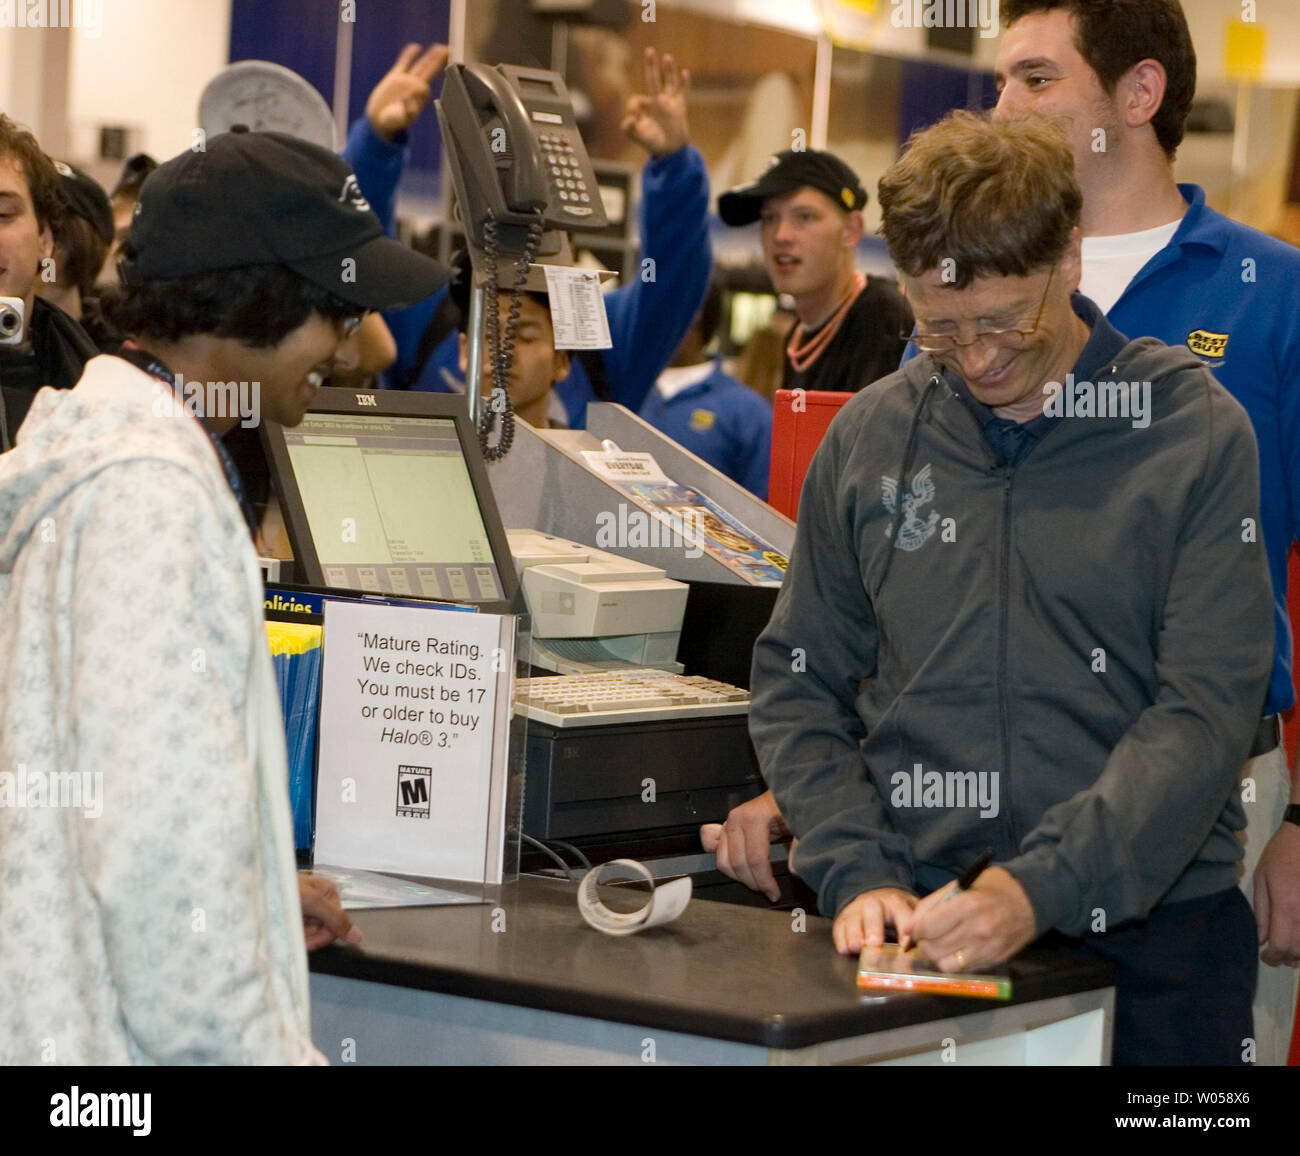 Bill Gates, founder of Microsoft (R) signs the first copy of Halo3 sold to Ritesh David at Best Buy in Bellevue, Washington on September 25, 2007